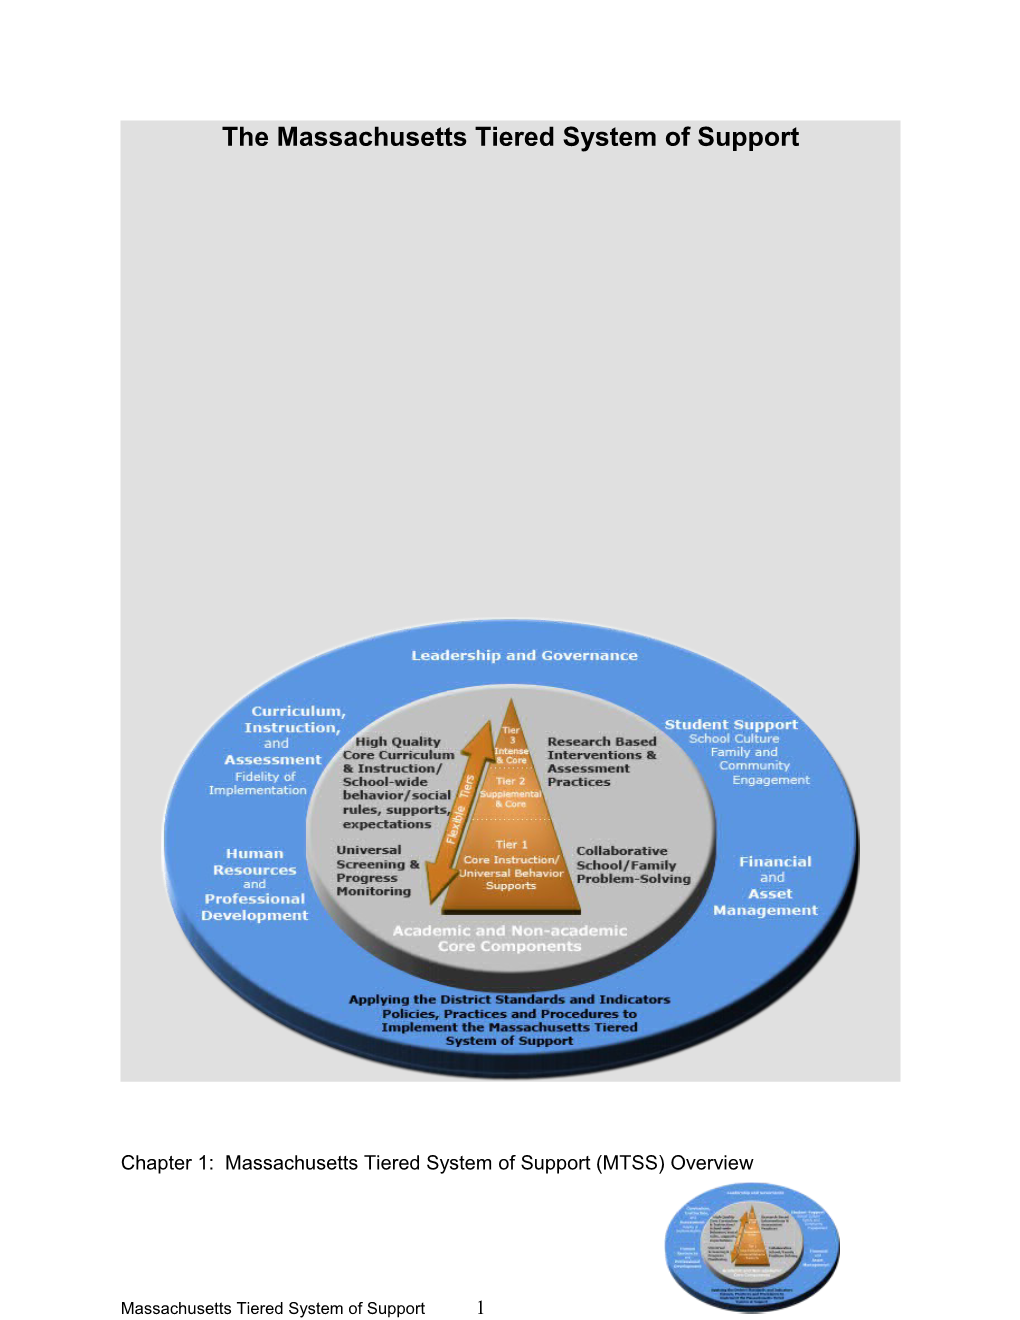 Blueprint - the Massachusetts Tiered System of Support (MTSS)